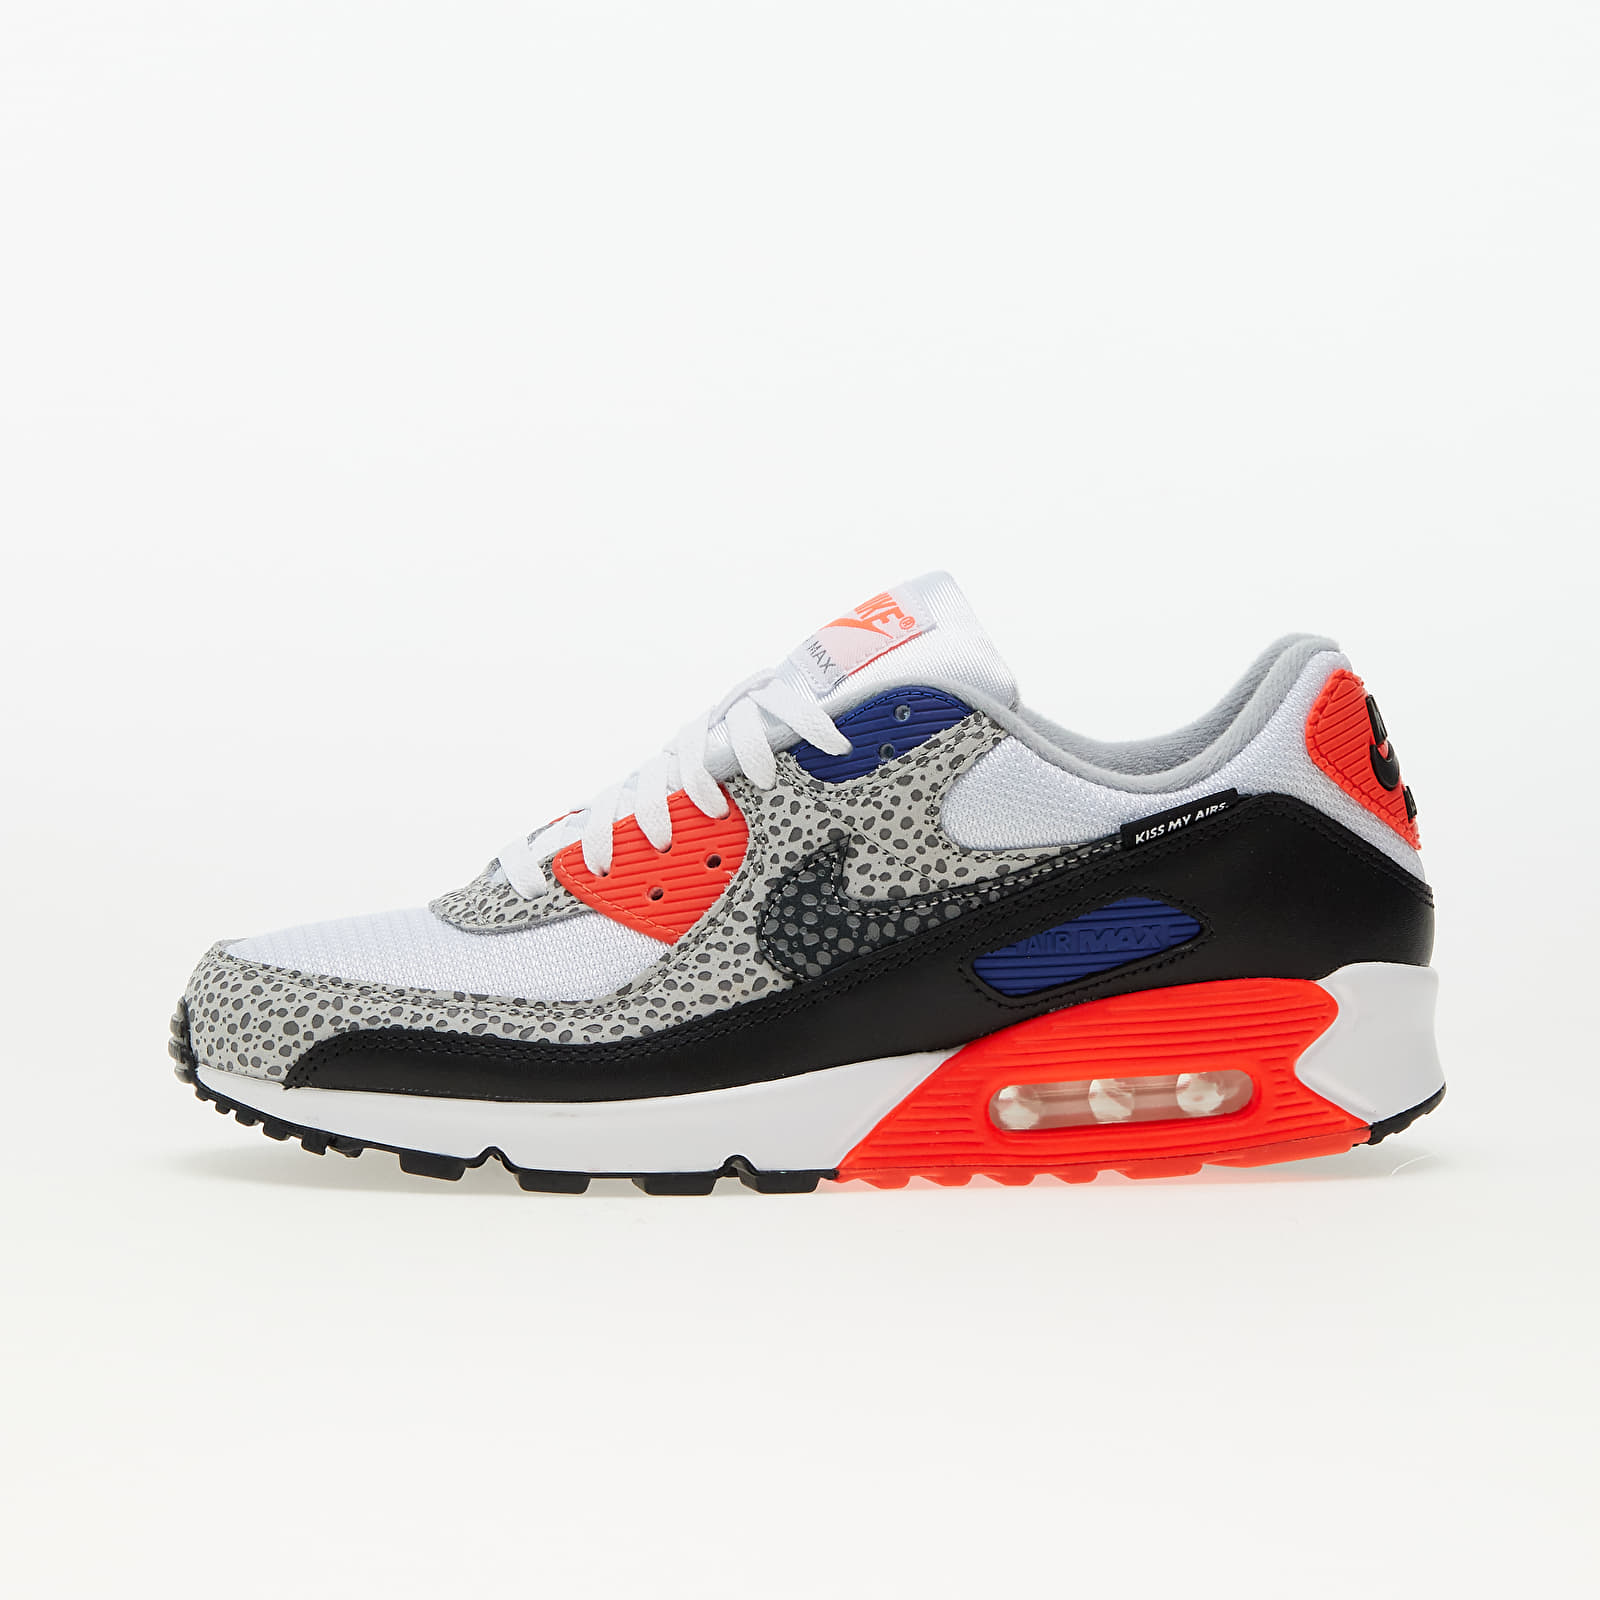 Chaussures et baskets homme Nike Air Max 90 White/ Black-Cool Grey-Lt Smoke Grey